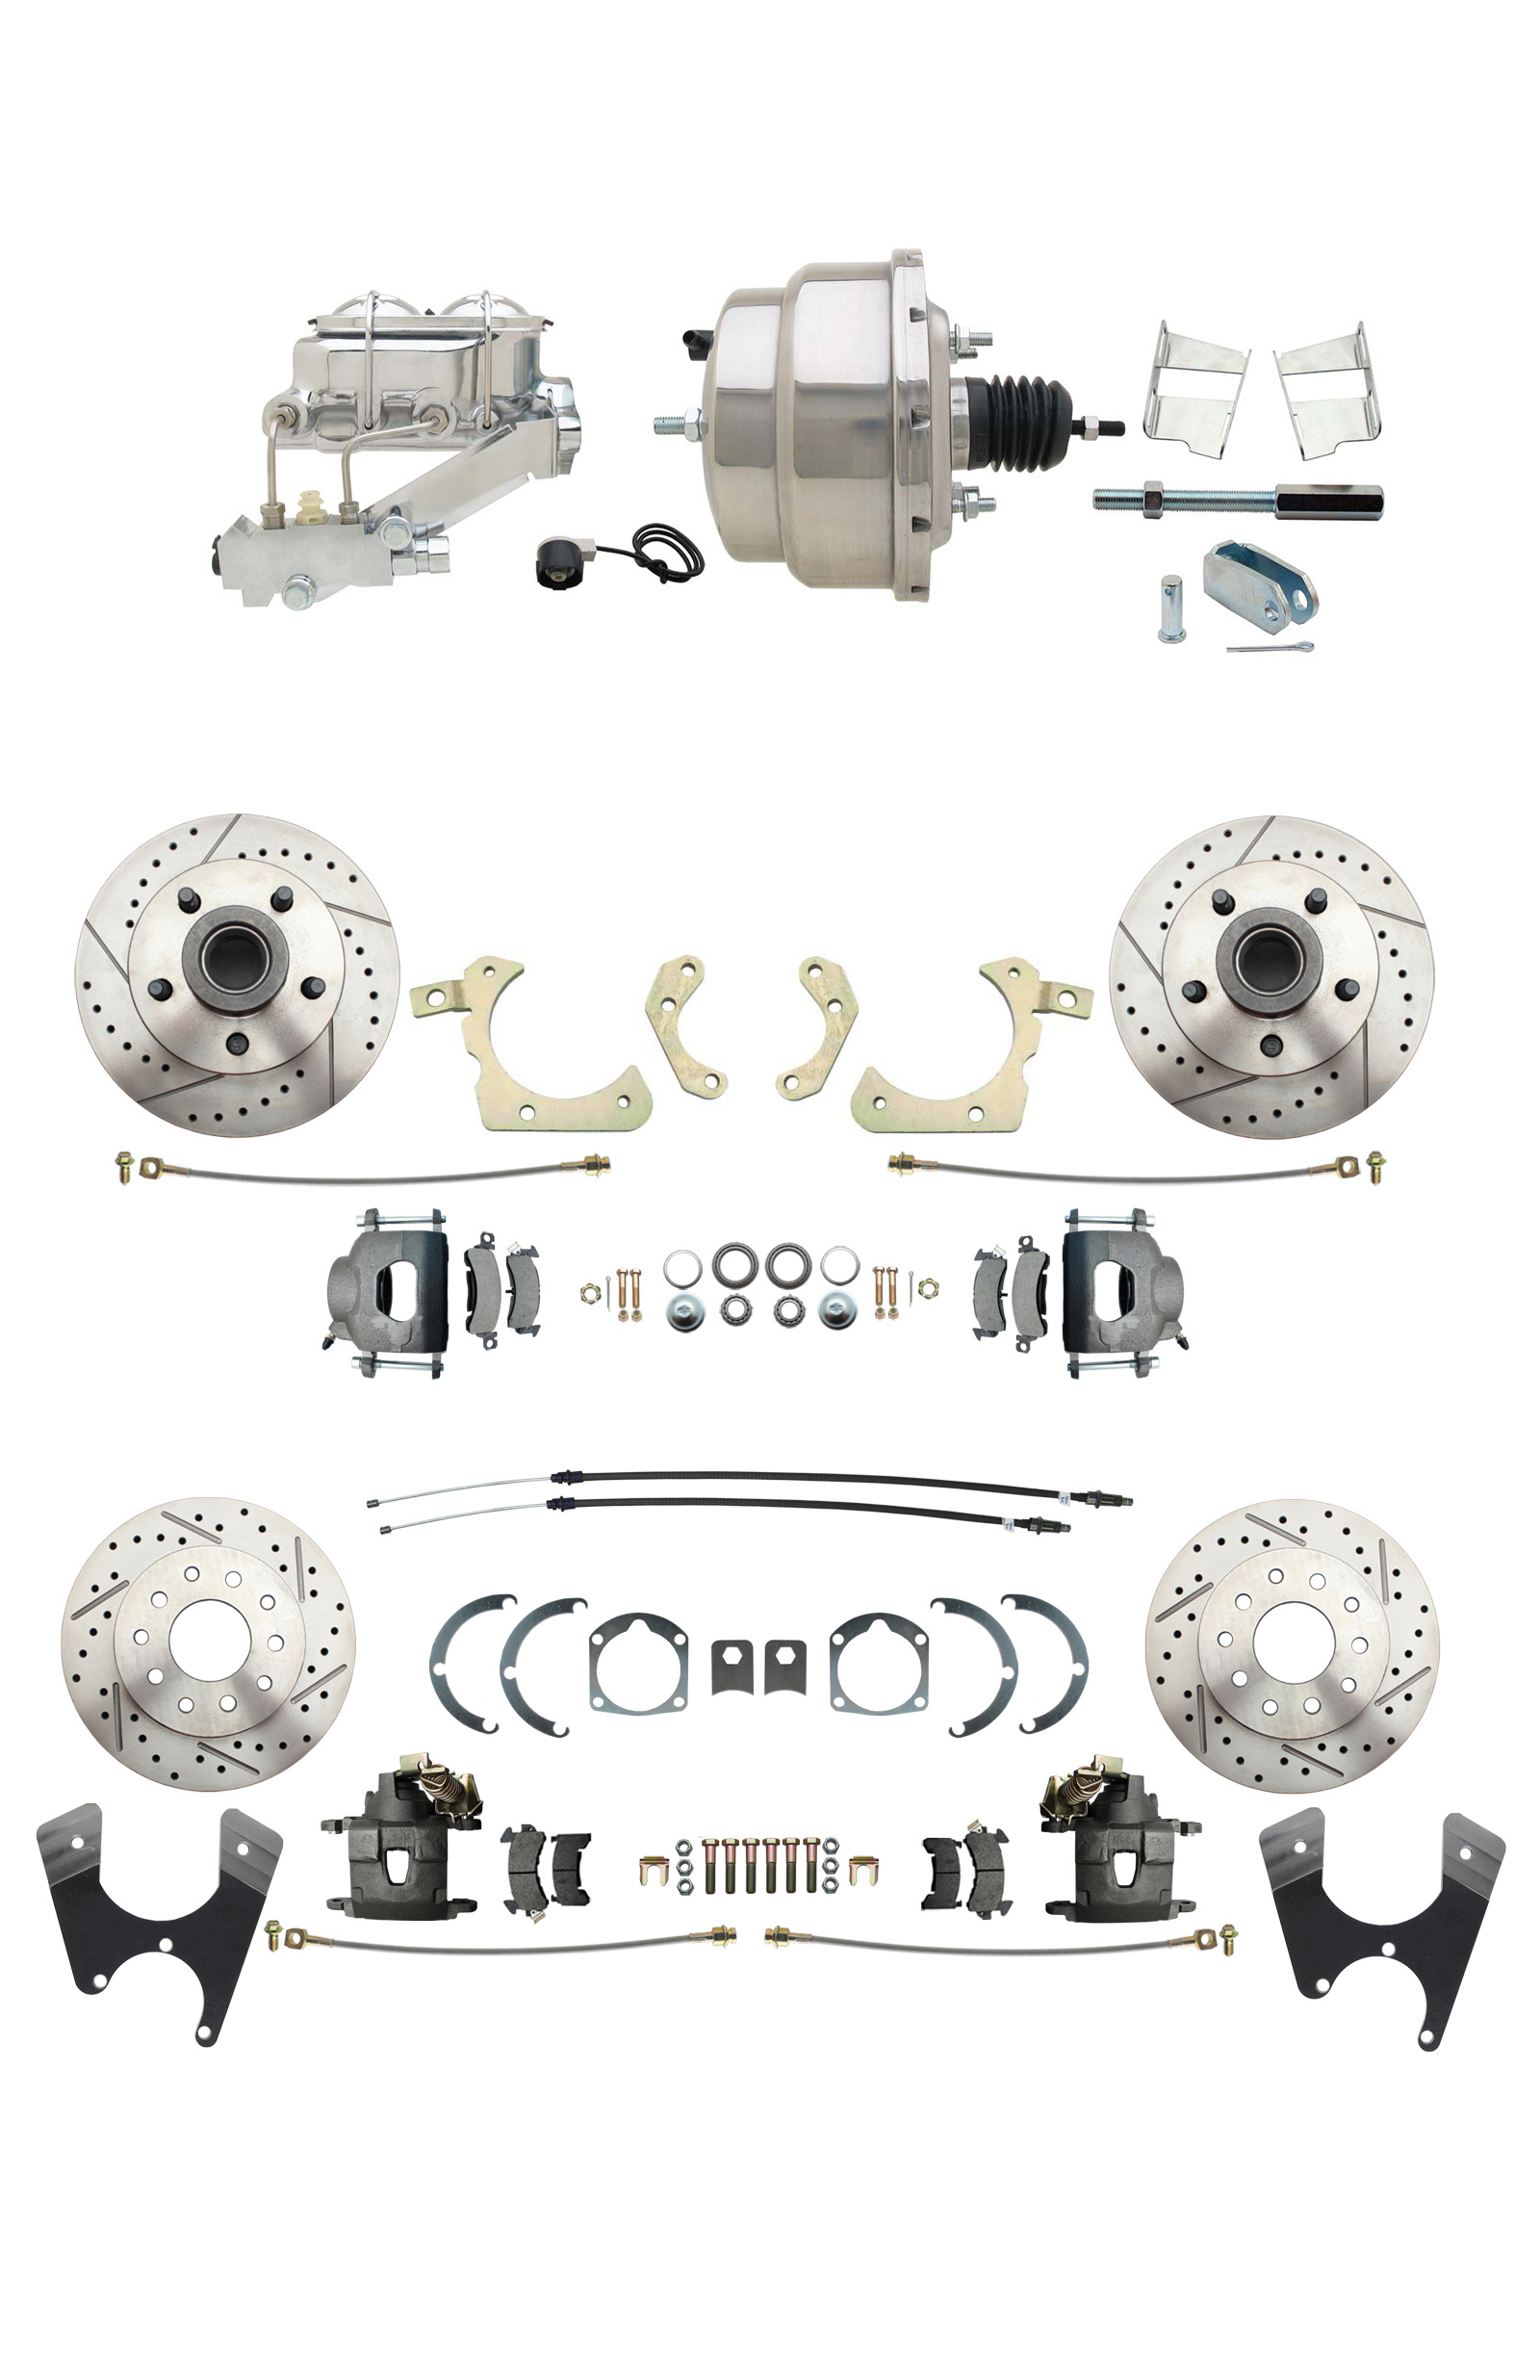 1959-1964 GM Full Size Disc Brake Kit Drilled/Slotted Rotors (Impala, Bel Air, Biscayne) & 8 Dual Stainless Steel Booster Conversion Kit W/ Chrome Master Cylinder Left Mount Disc/ Drum Proportioning Valve Kit